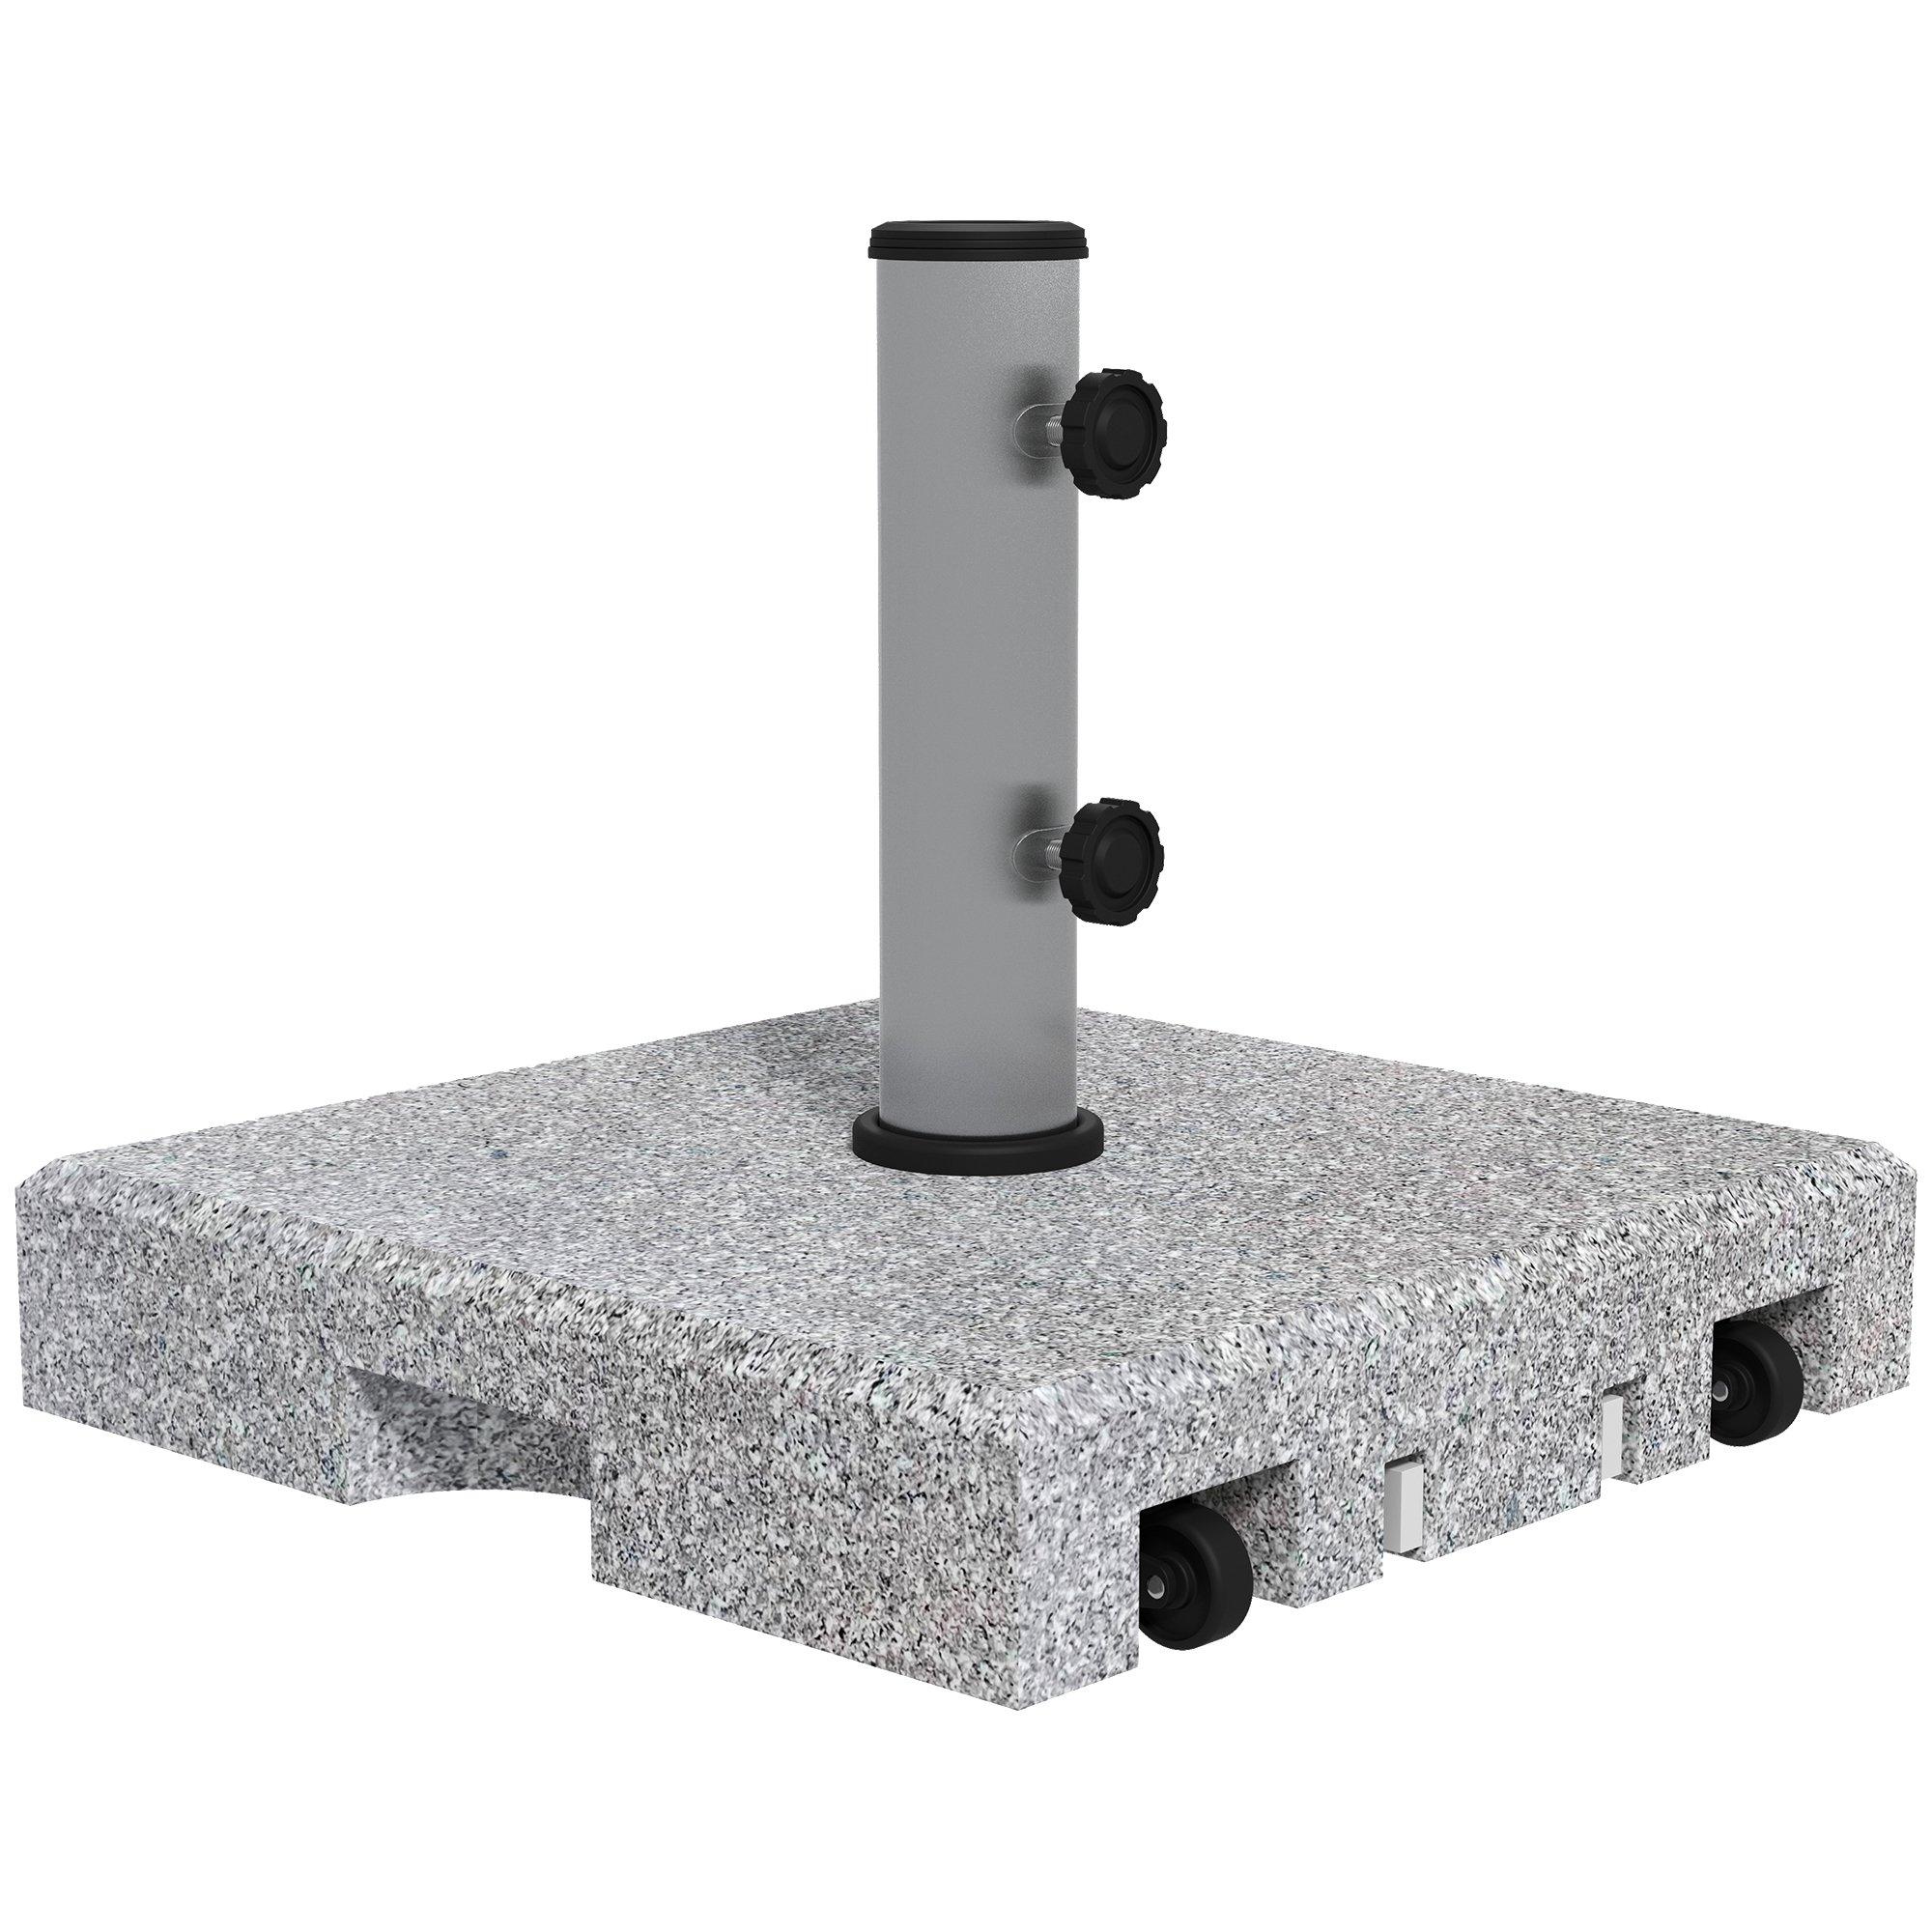 28kg Granite Parasol Base Weight Umbrella Stand with Wheels, Retractable Handle